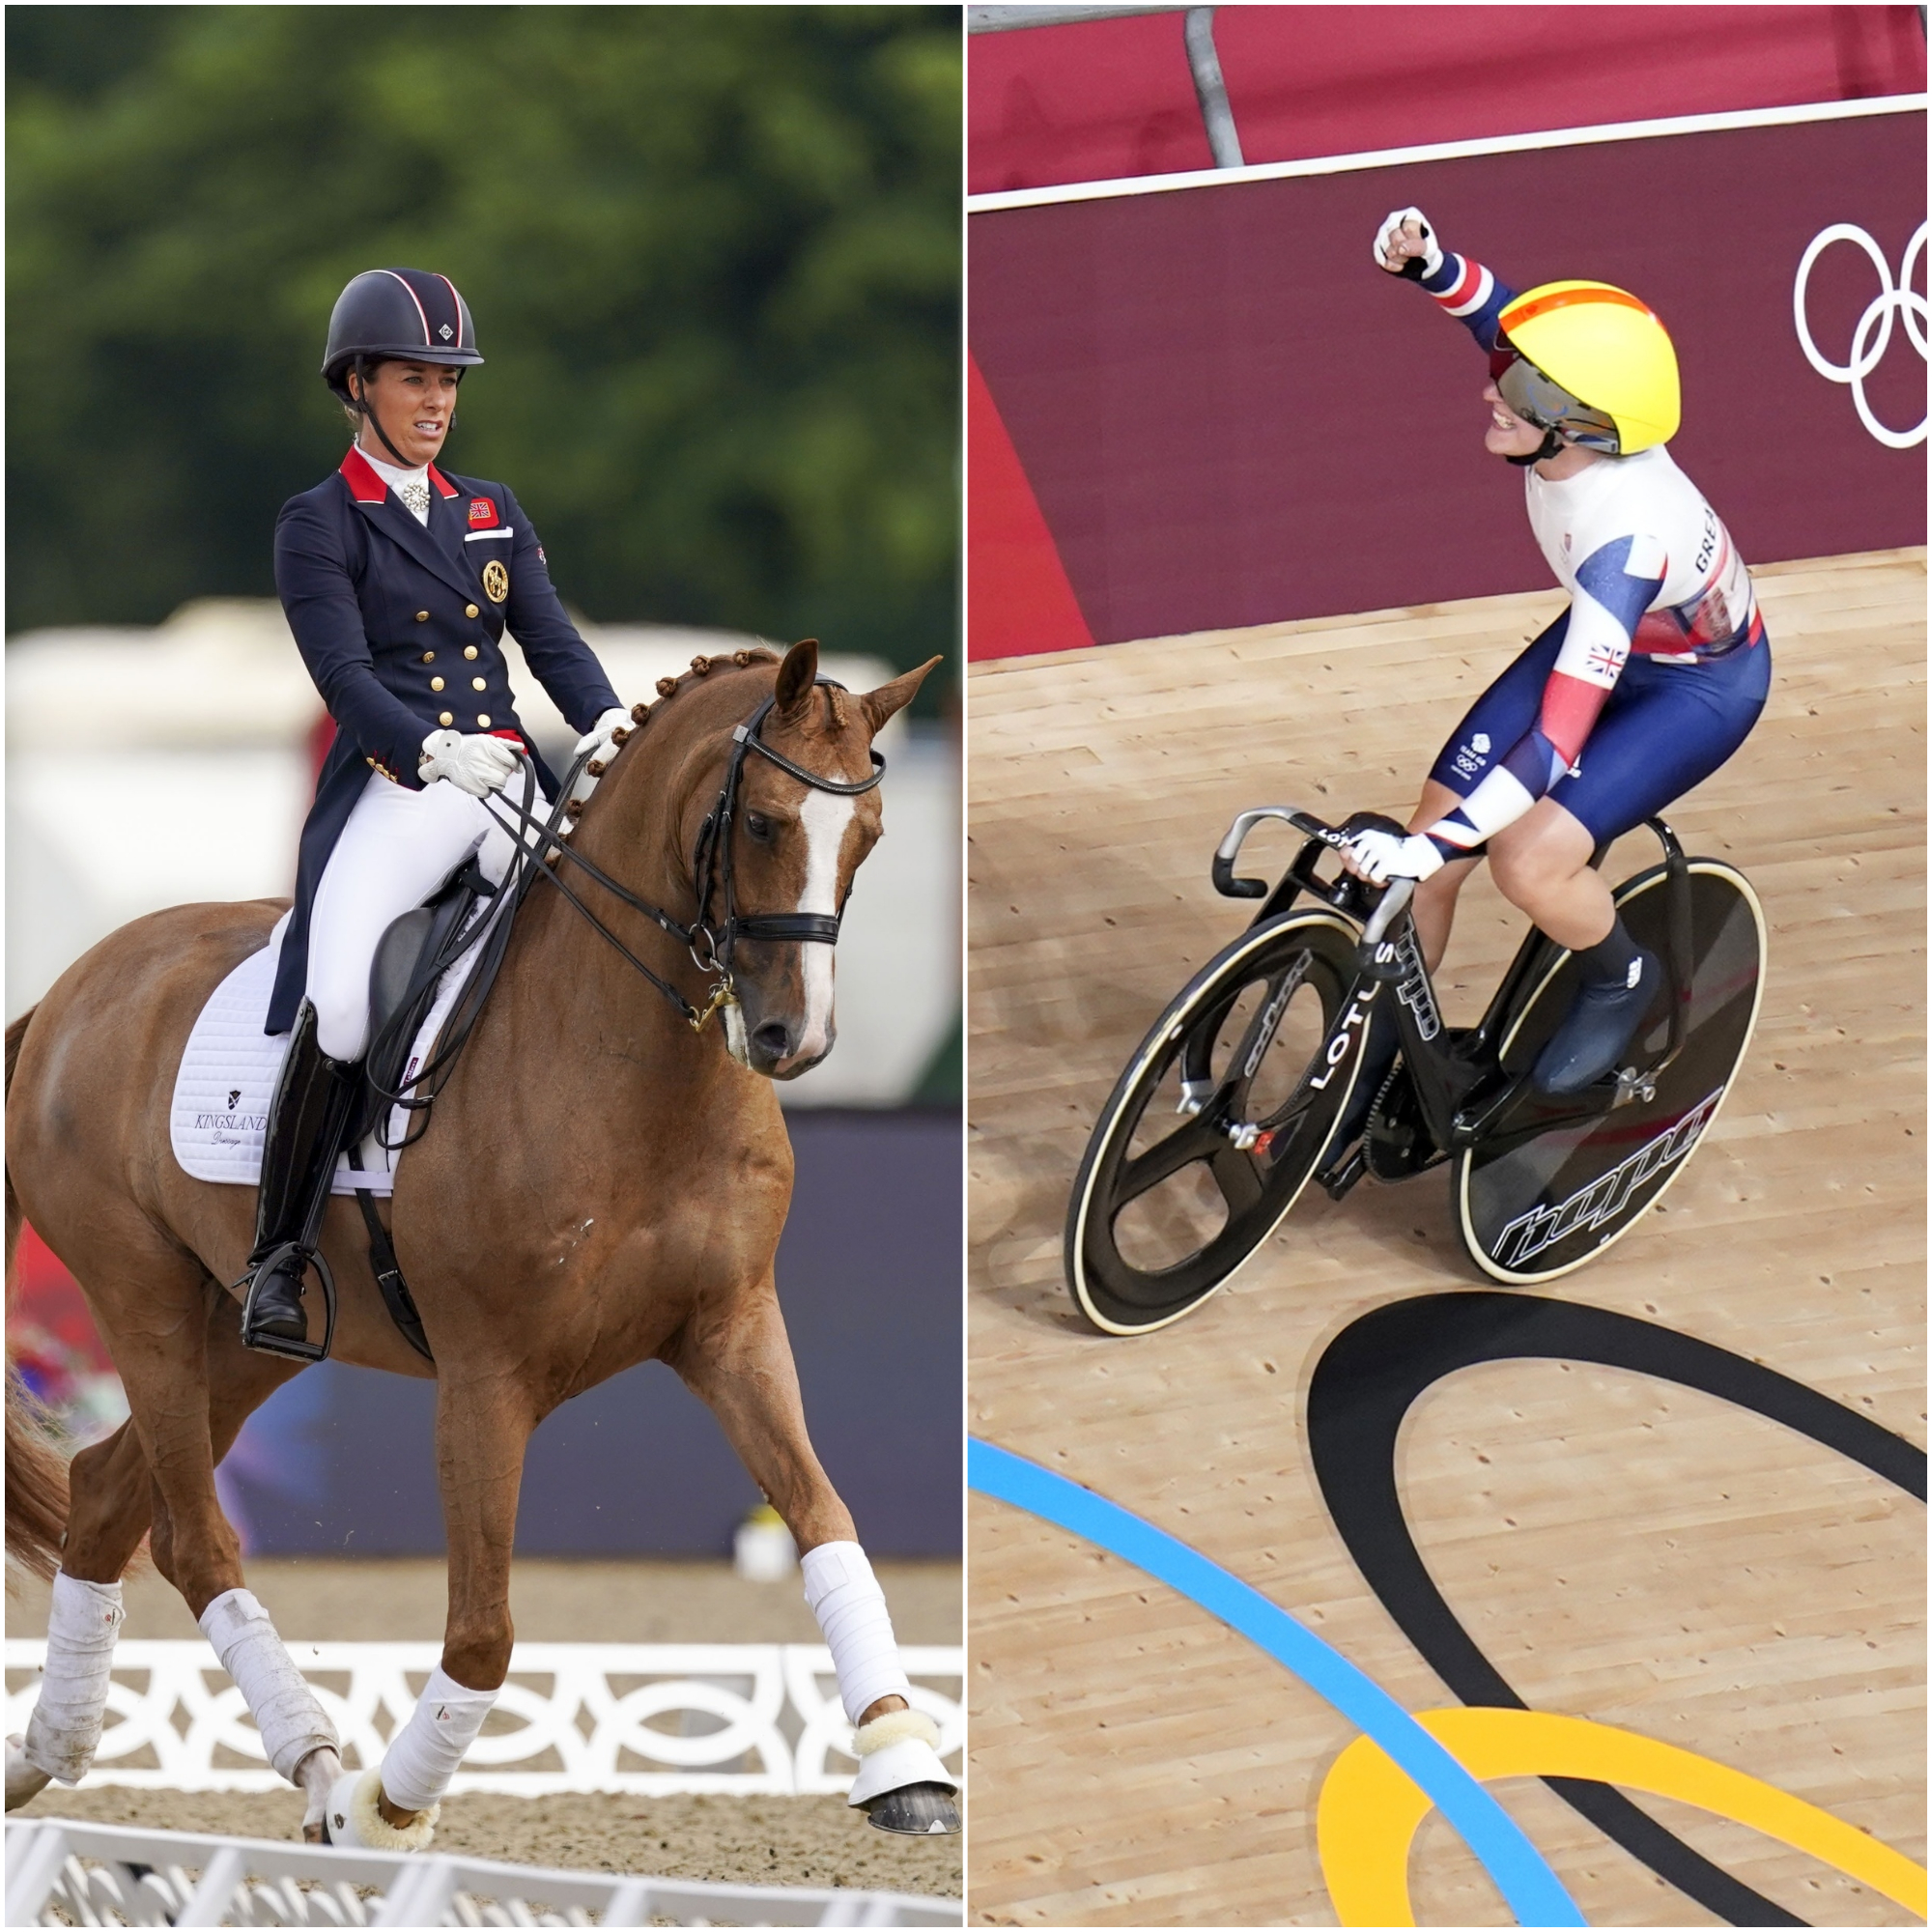 Laura Kenny, right, and Charlotte Dujardin